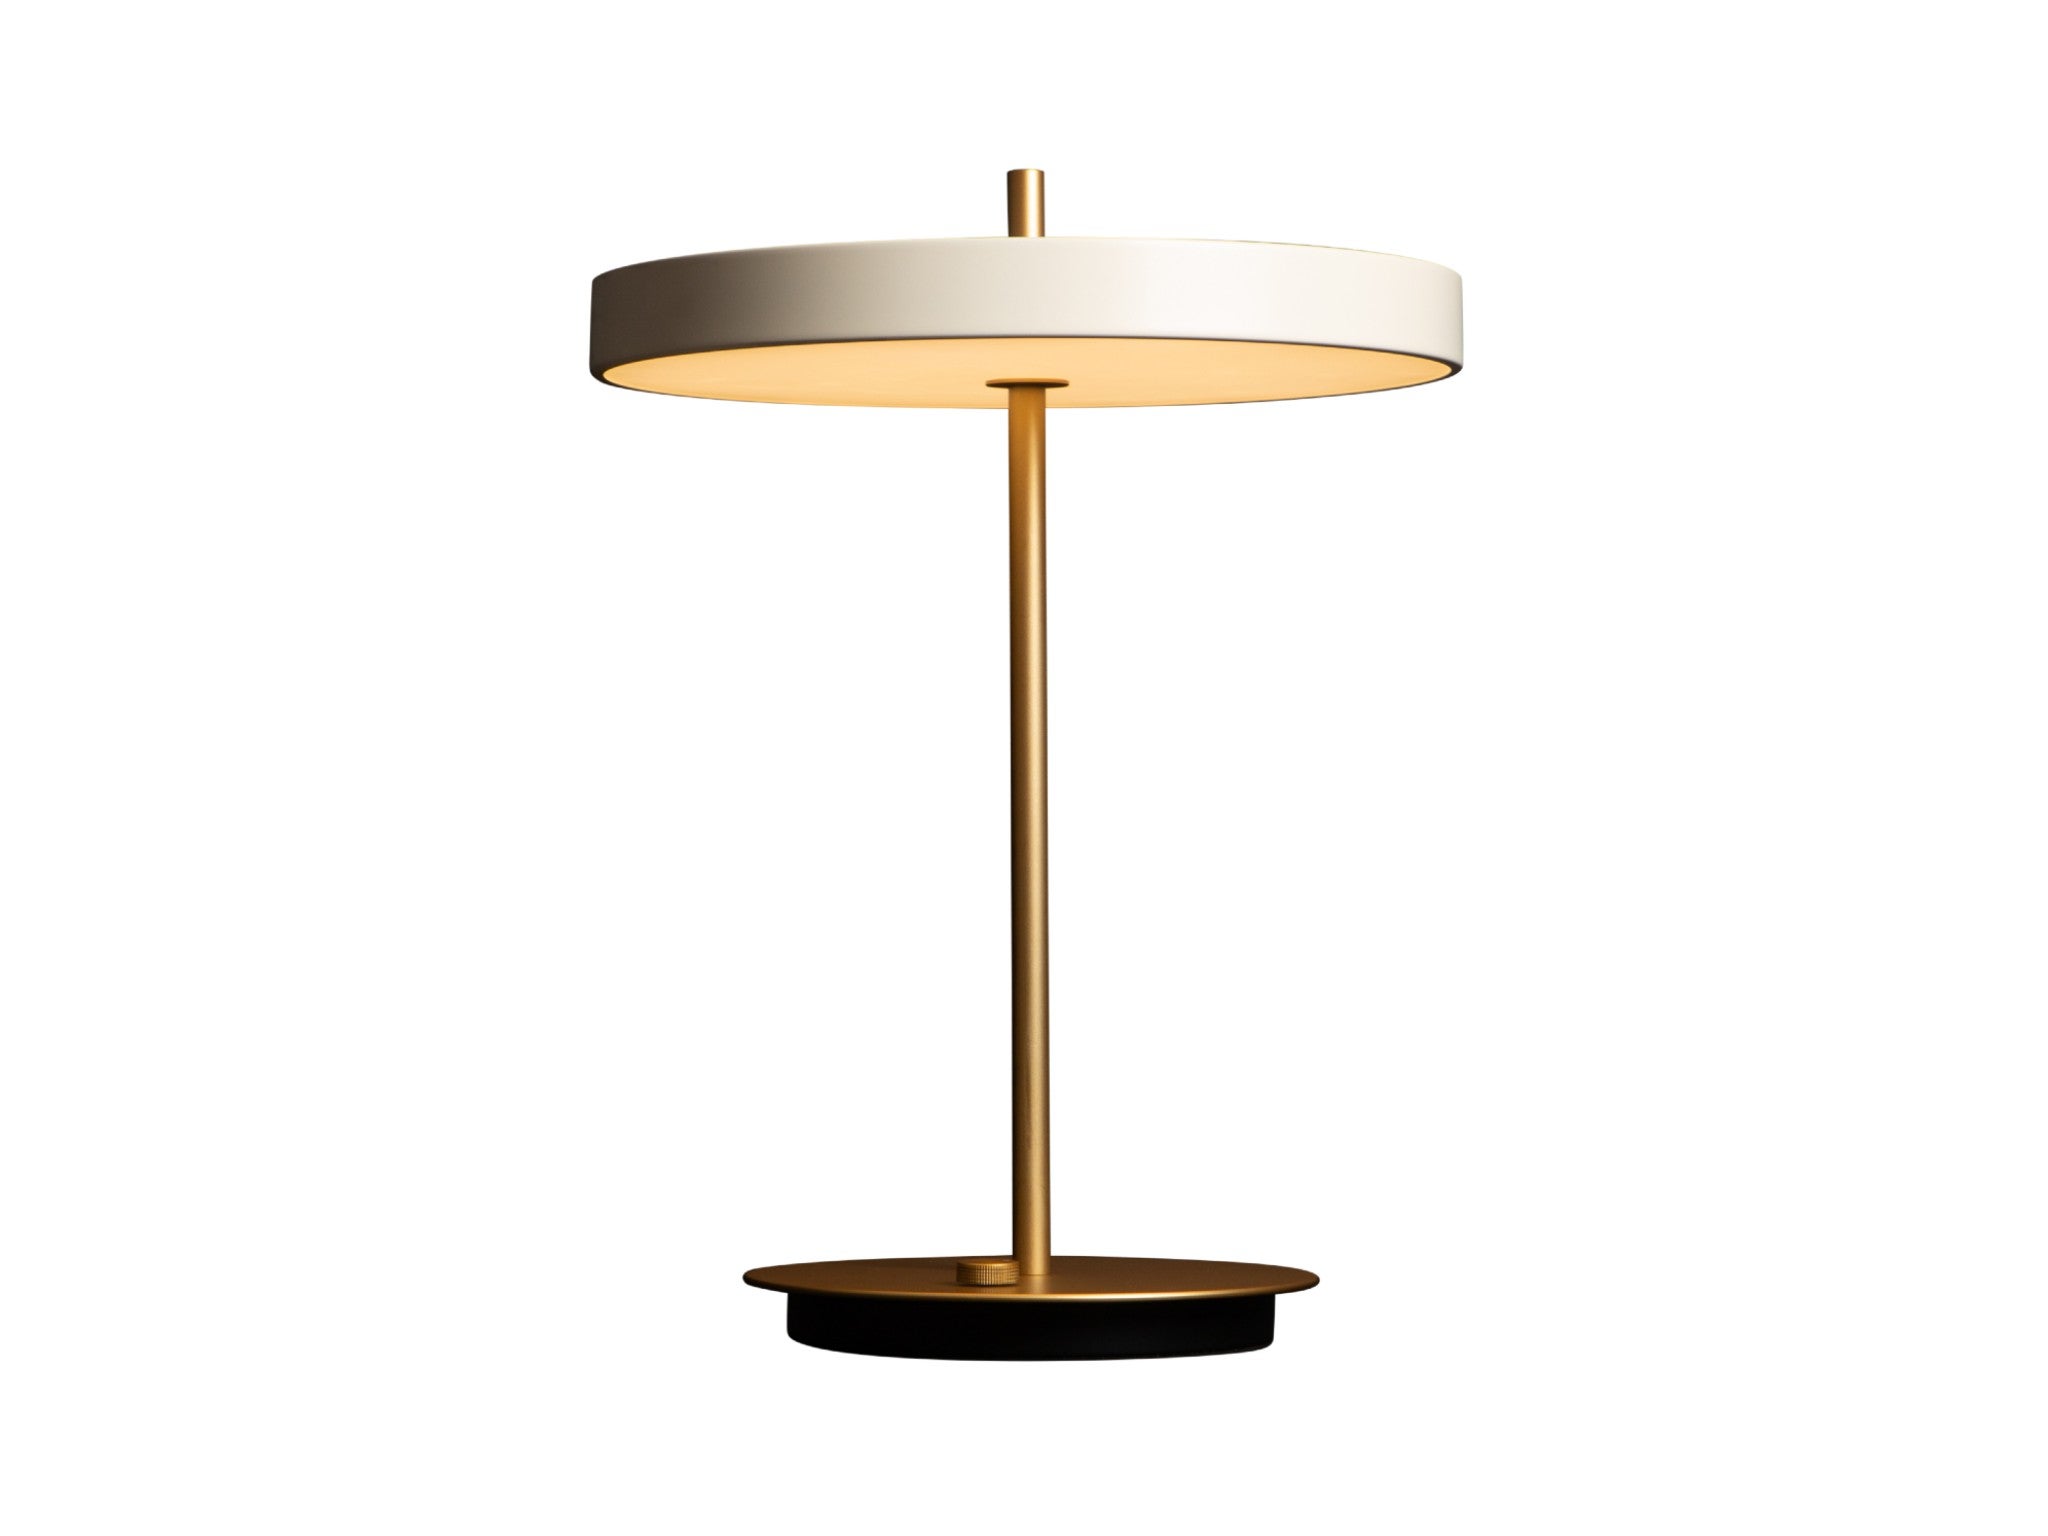 Dowsing & Reynolds pearl white asteria table lamp indybest.jpeg